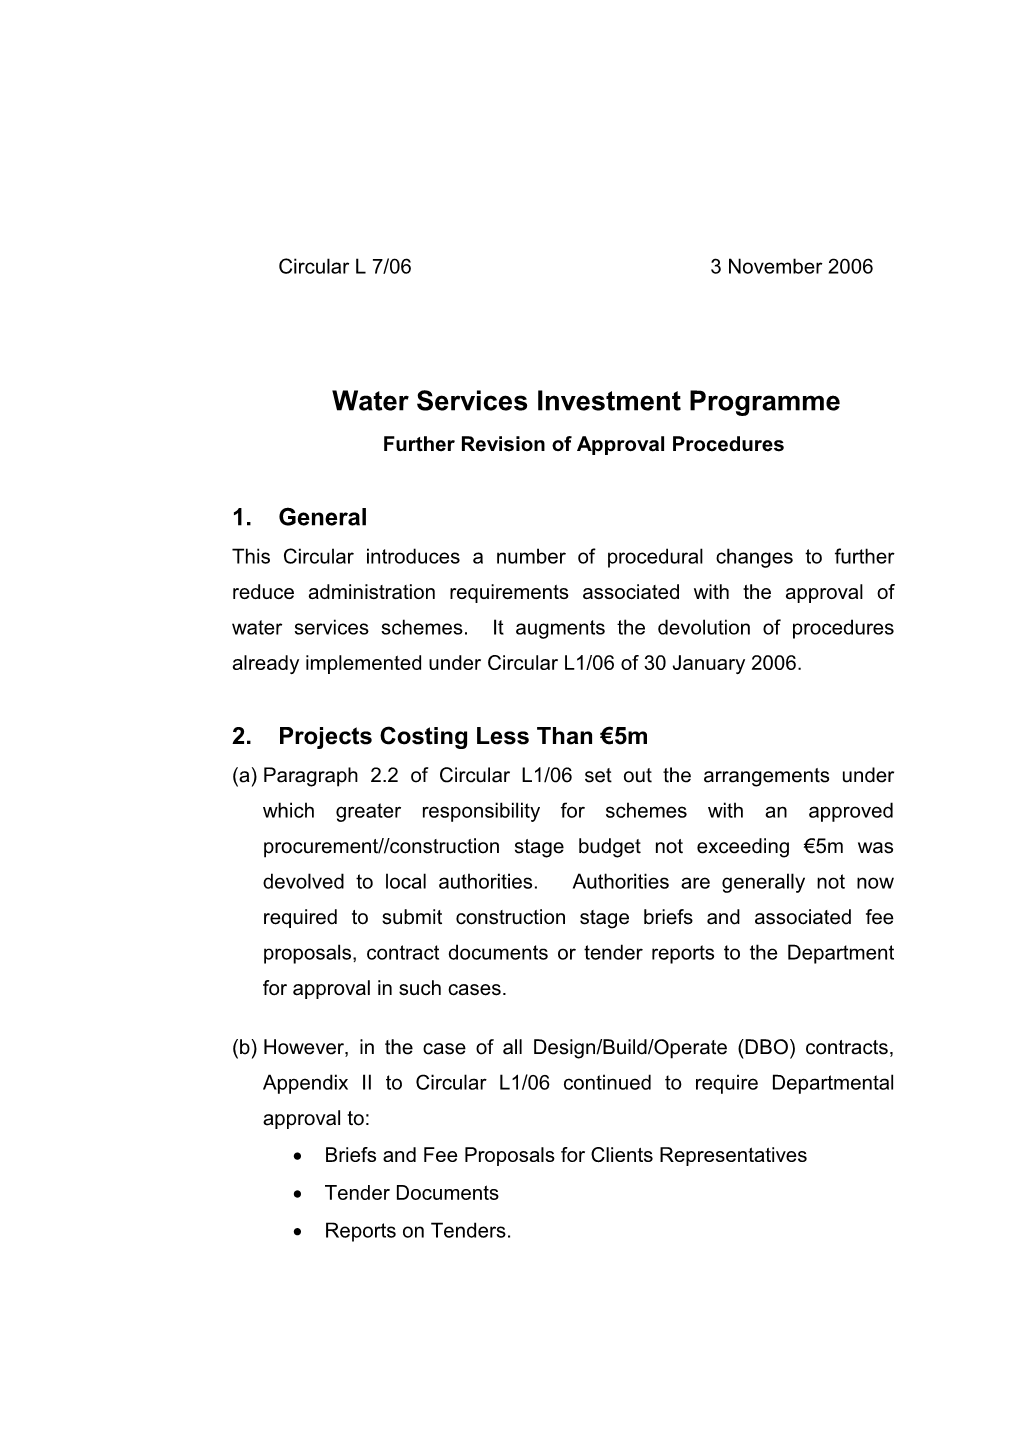 Water Services Investment Programme